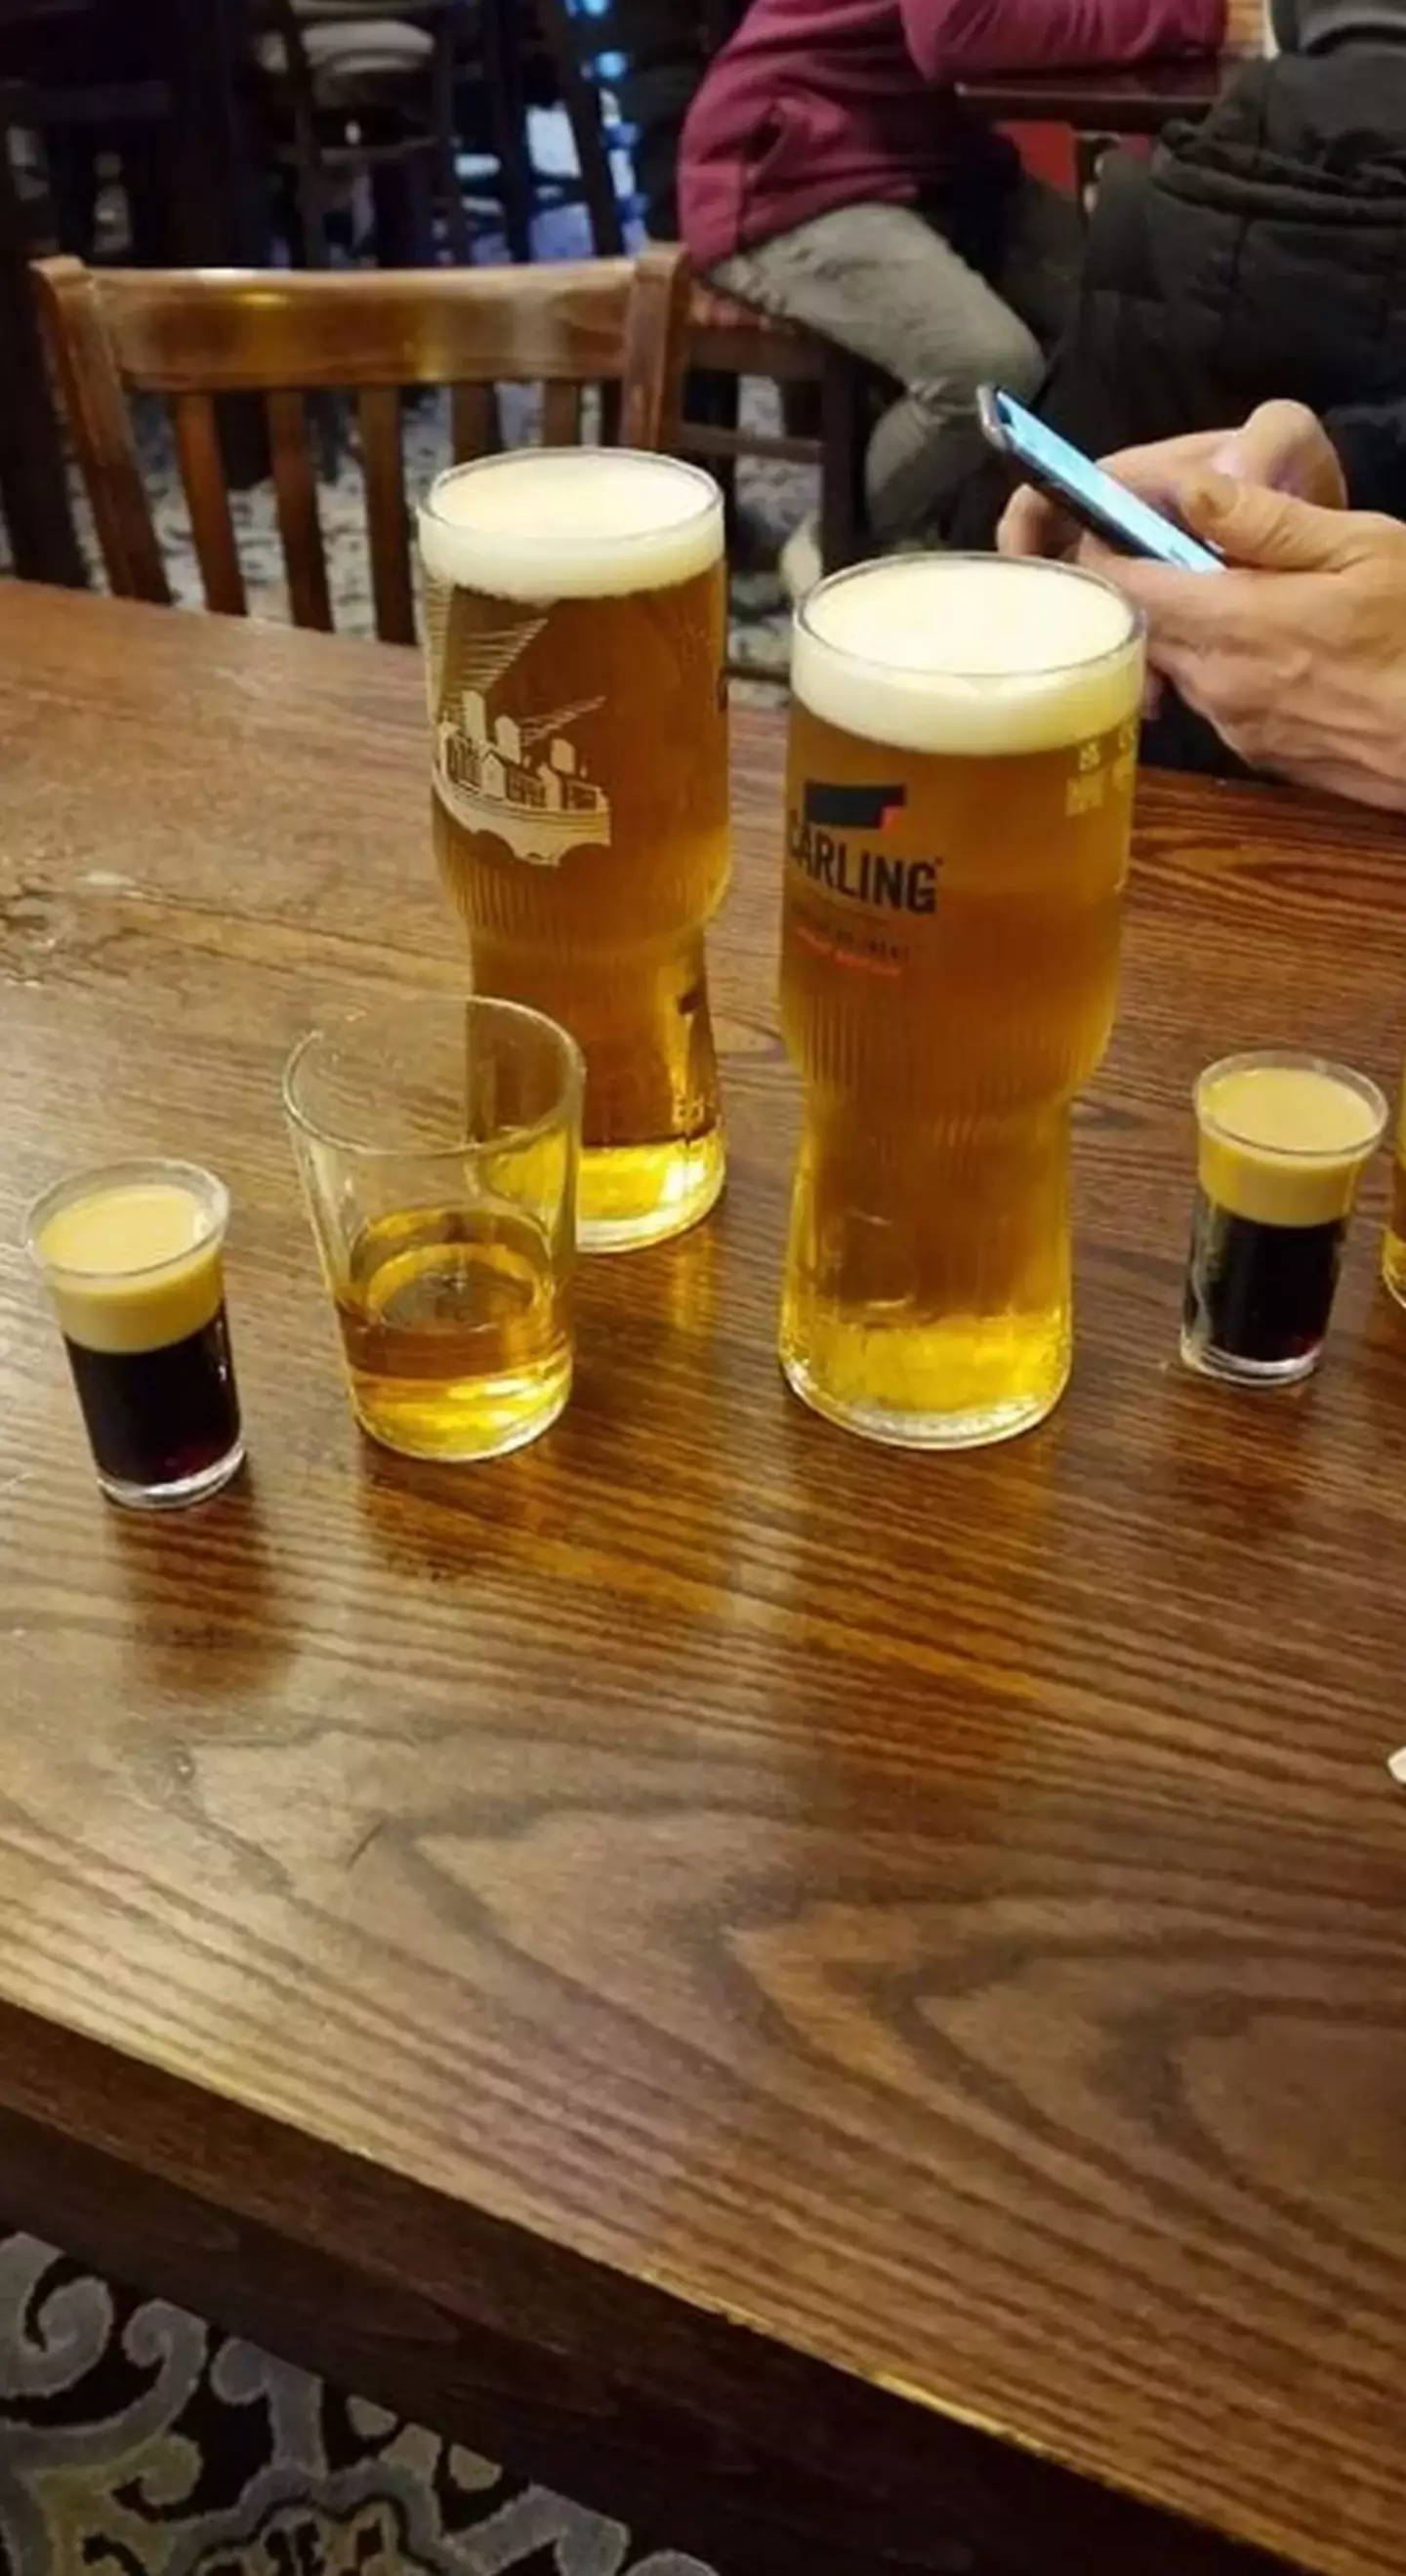 The two blokes were inundated with free drinks from strangers. (Facebook/Wetherspoons The Game)